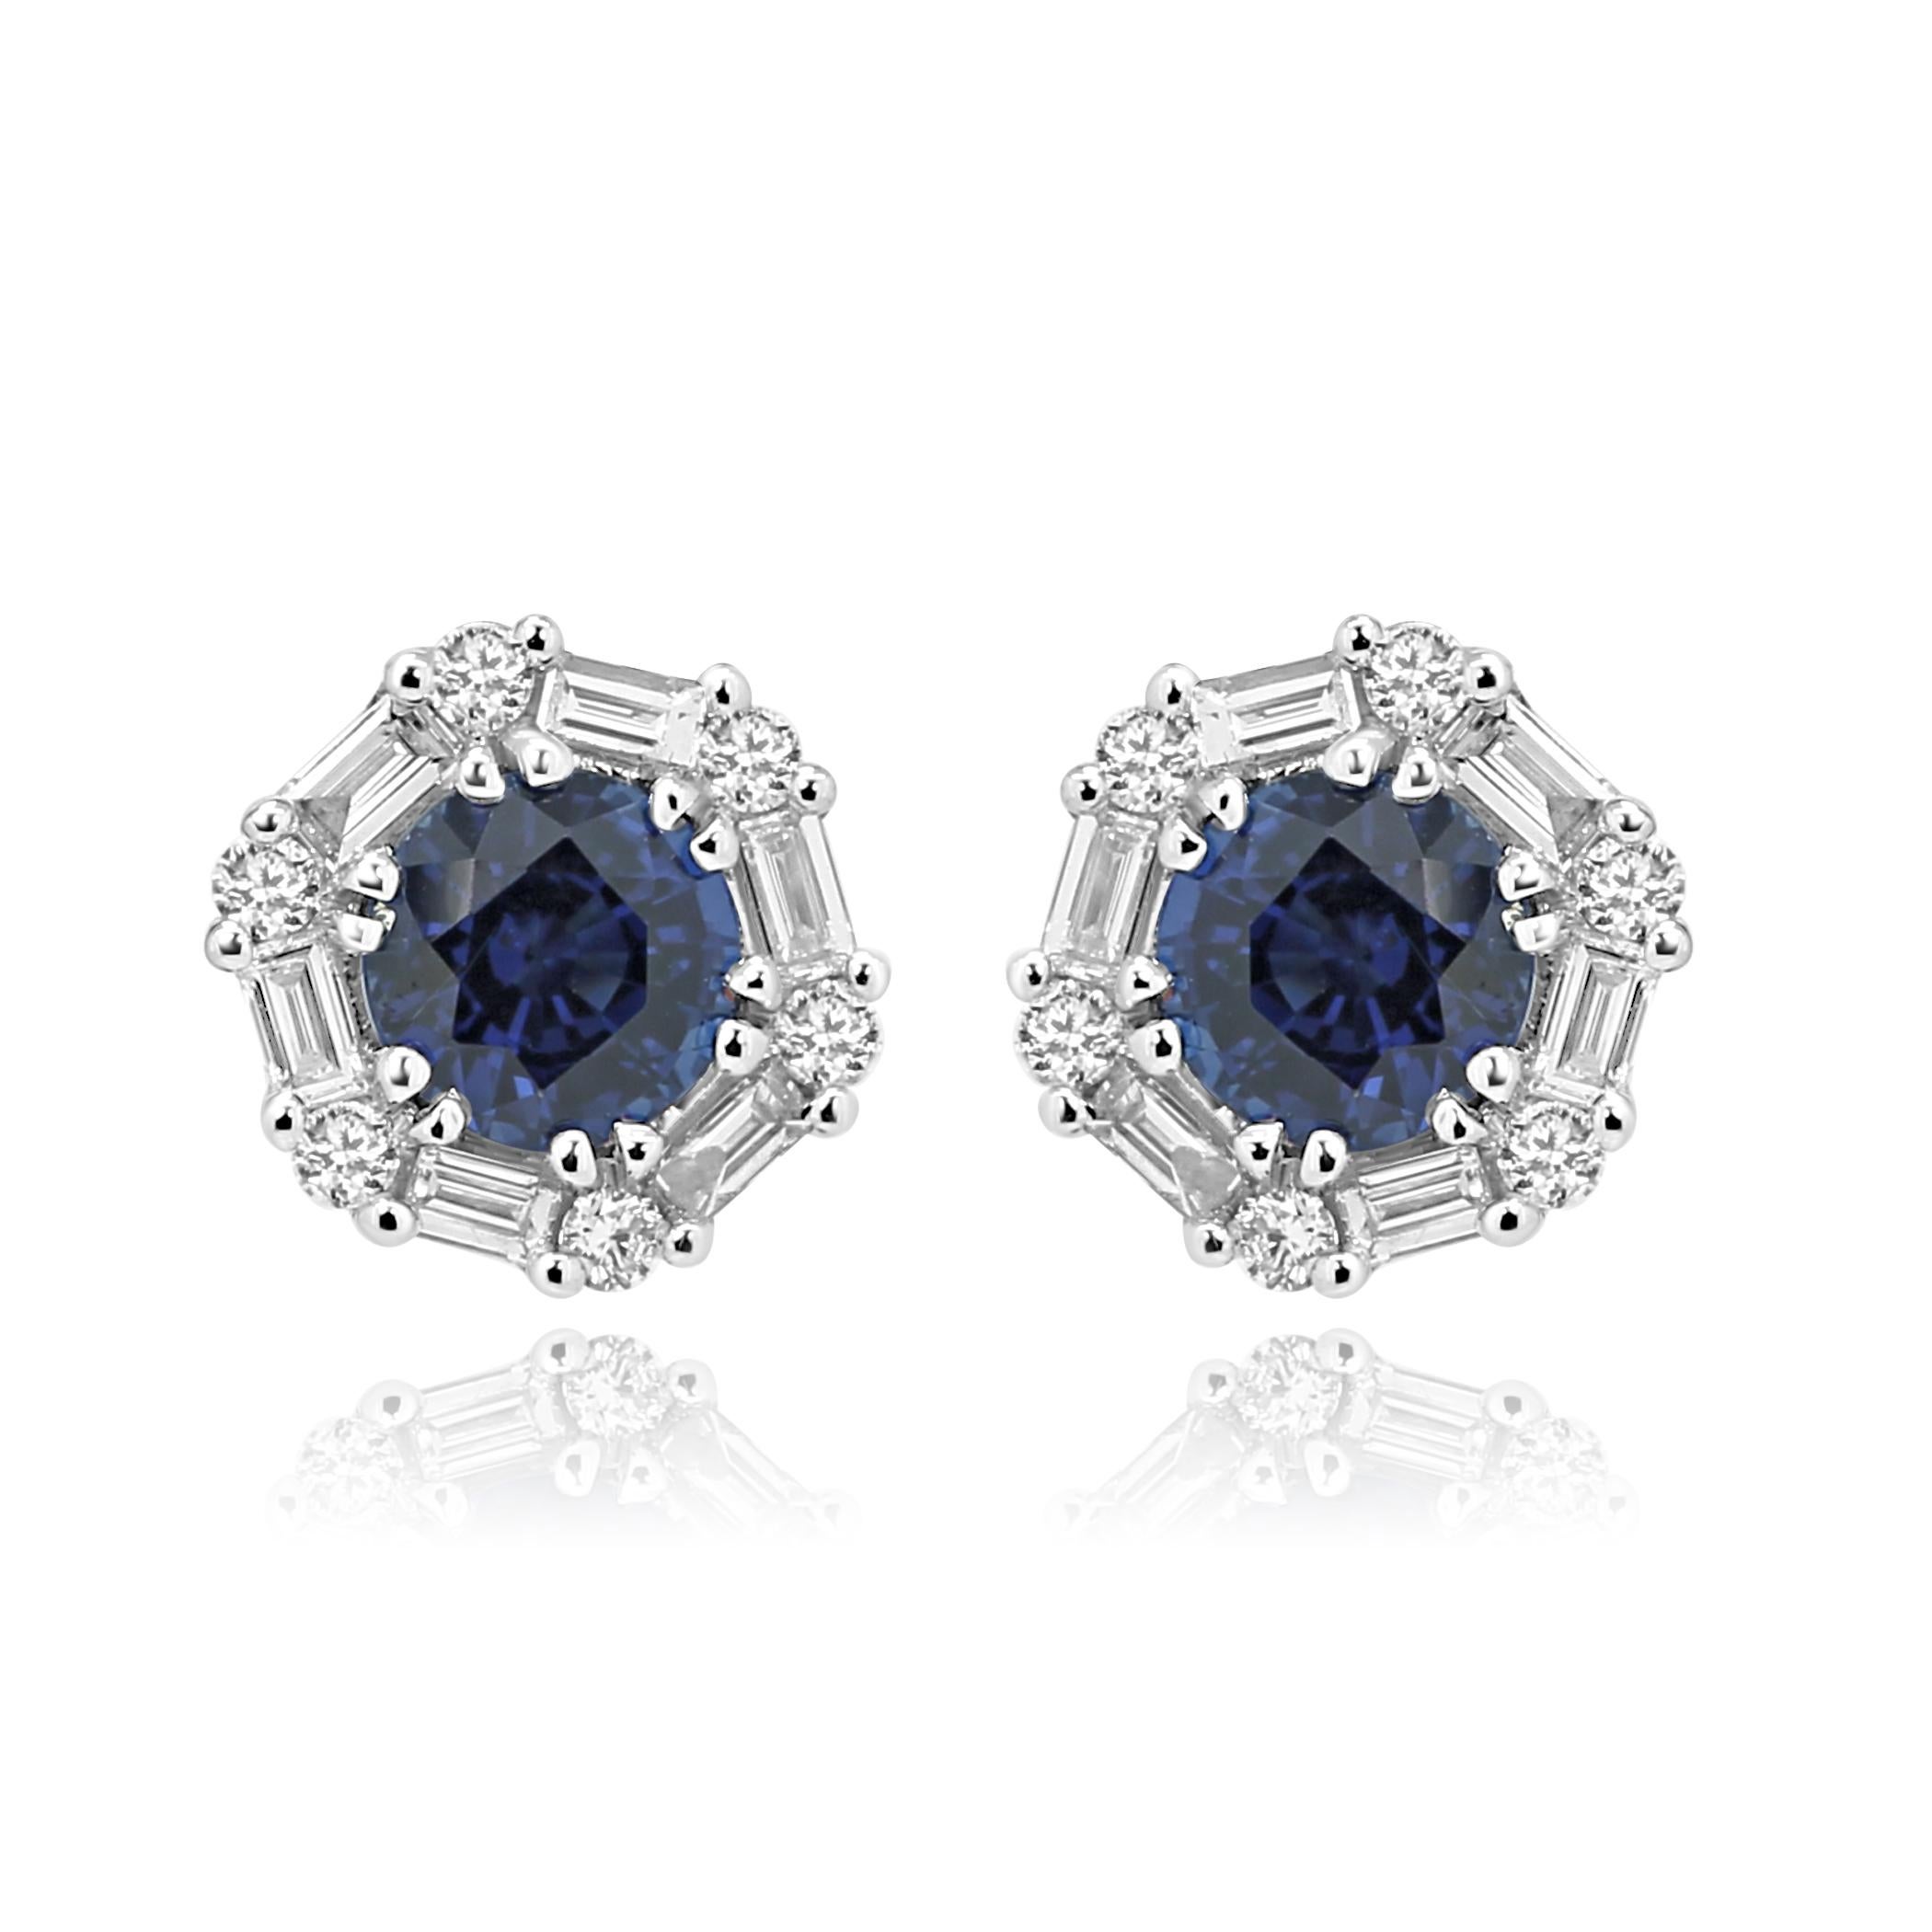 2 Blue Sapphire Round 1.14 Carat Encircled in a Halo White Diamond Round 0.15 Carat and White  Diamond Baguettes 0.25 Carat in 14K White Gold Gorgeous Earring.

Center Blue Sapphire Weight 1.14 Carat
Total Weight 1.54 Carat

Style available in